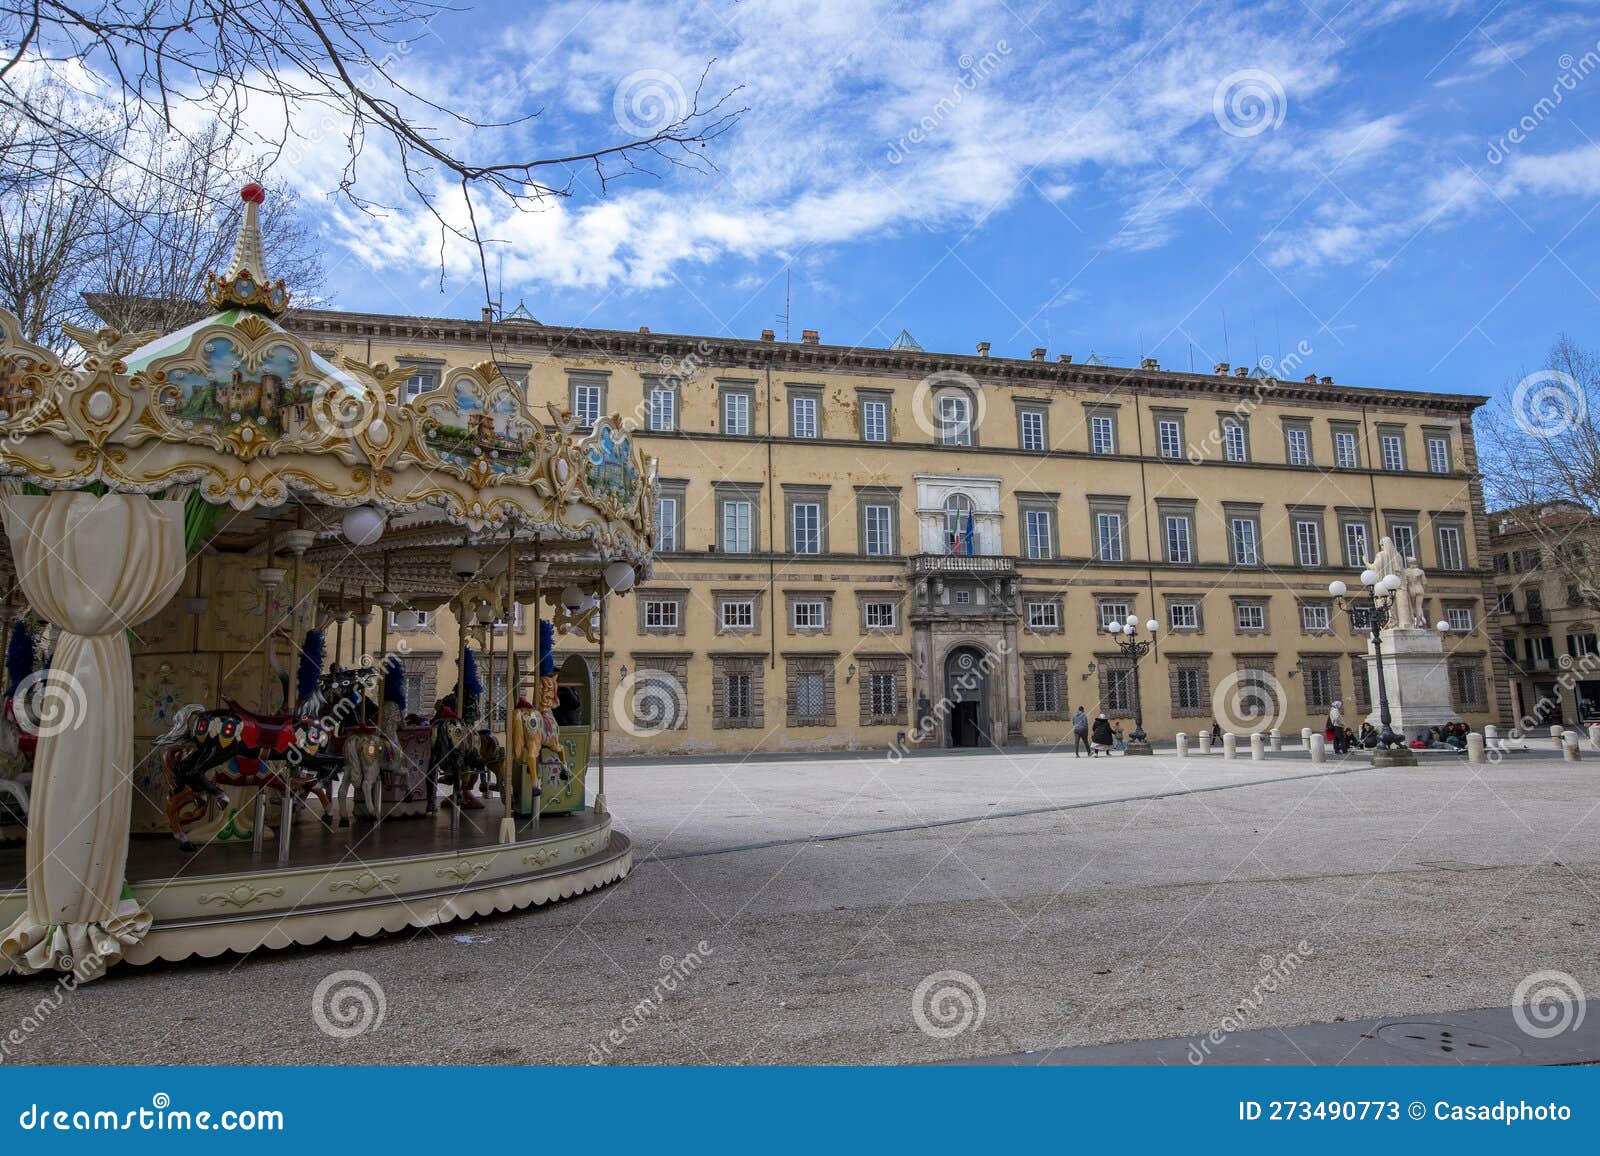 colorful carousel in front of the palazzo ducale on piazza napoleone in historic center of lucca, italy